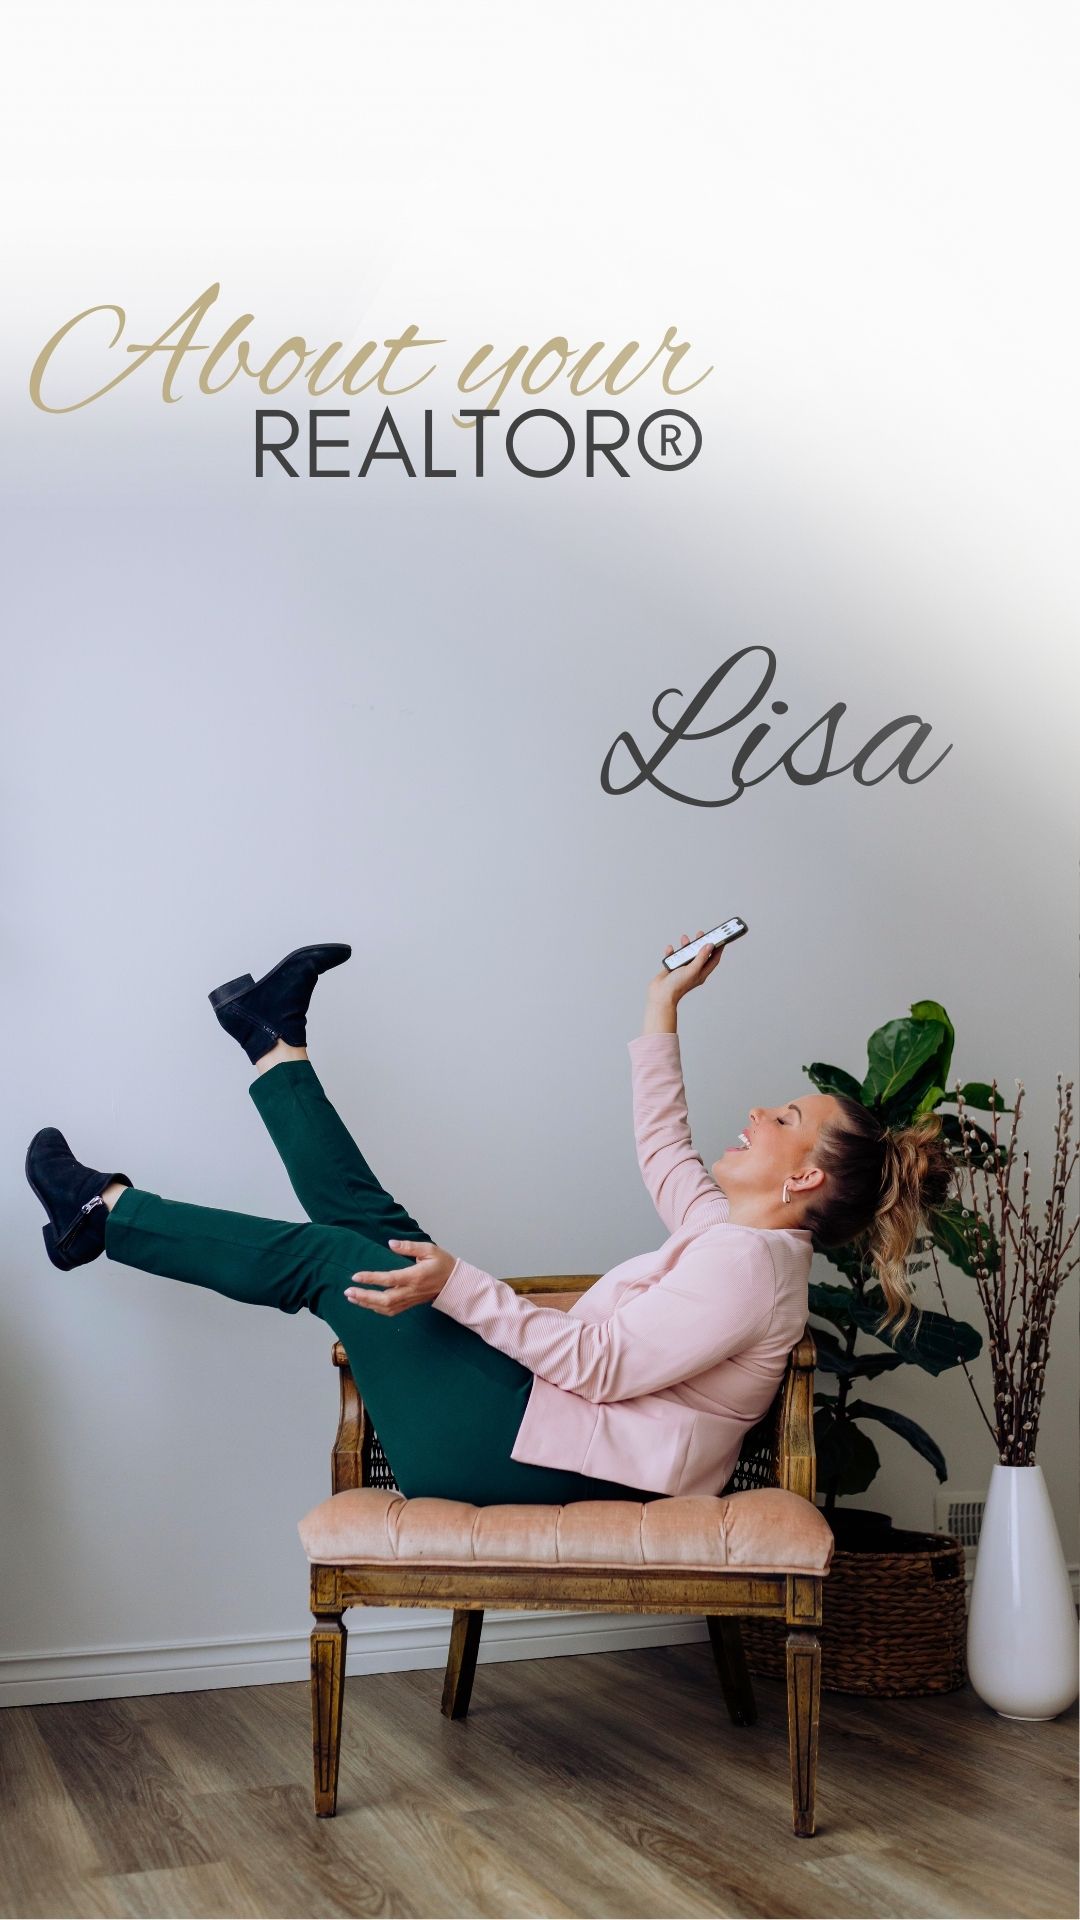 About your realtor